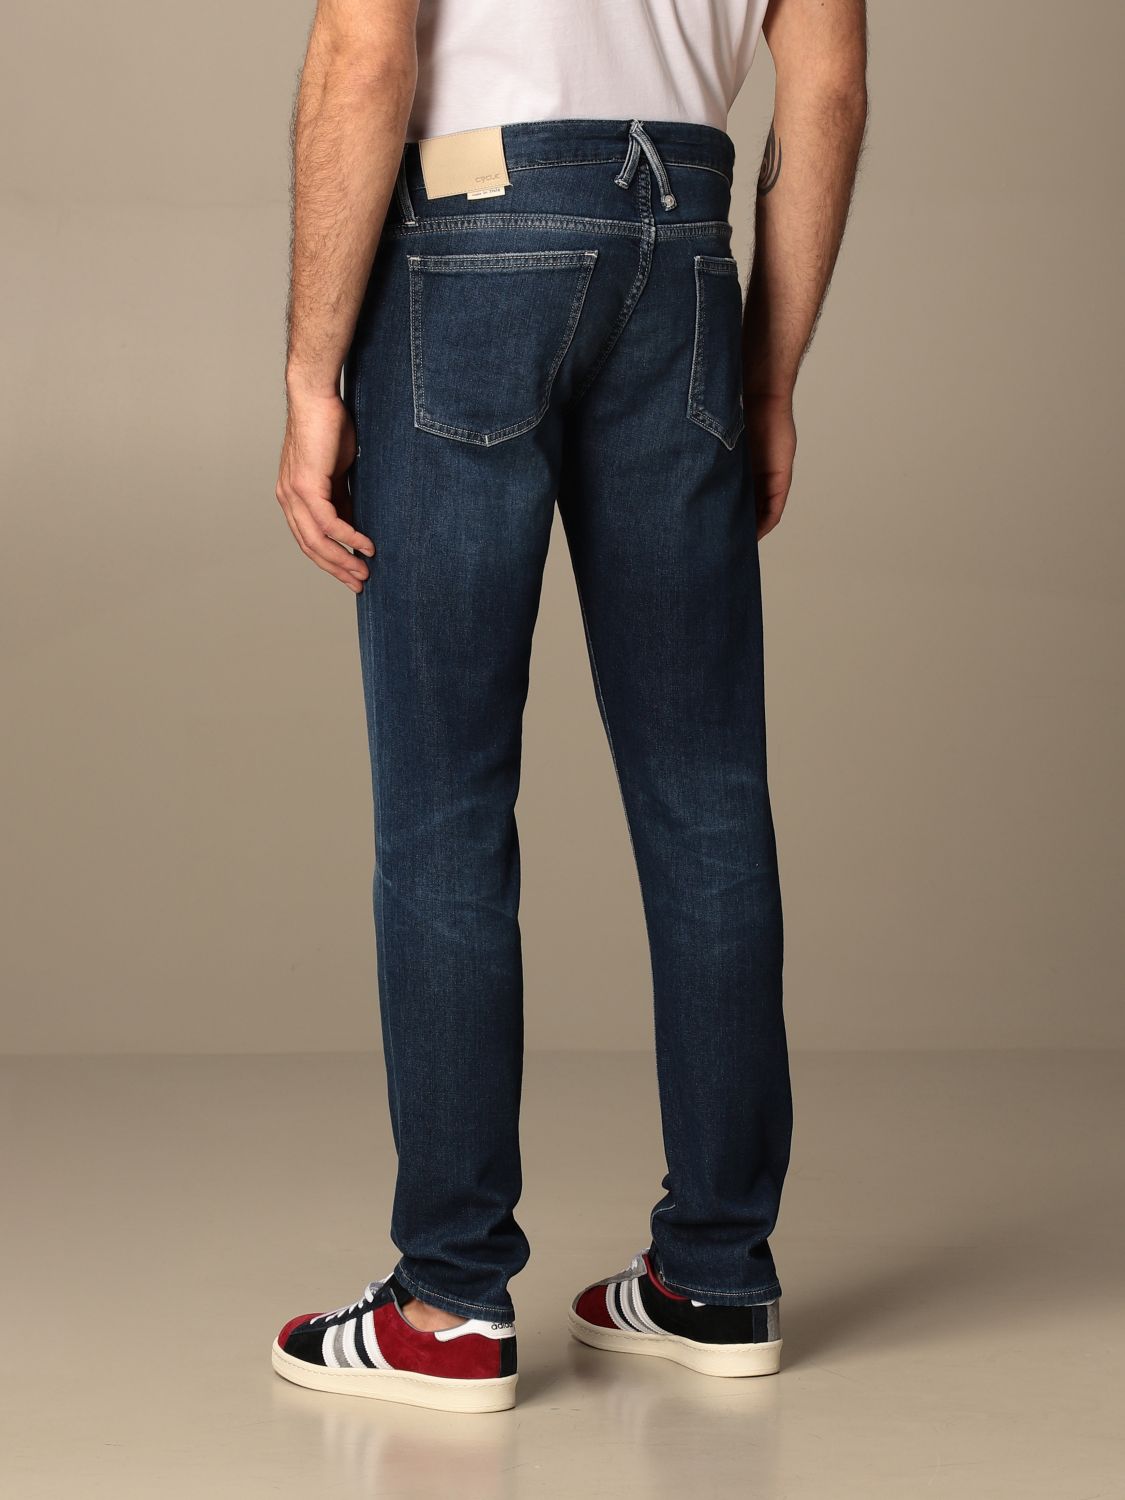 CYCLE jeans in used stretch denim